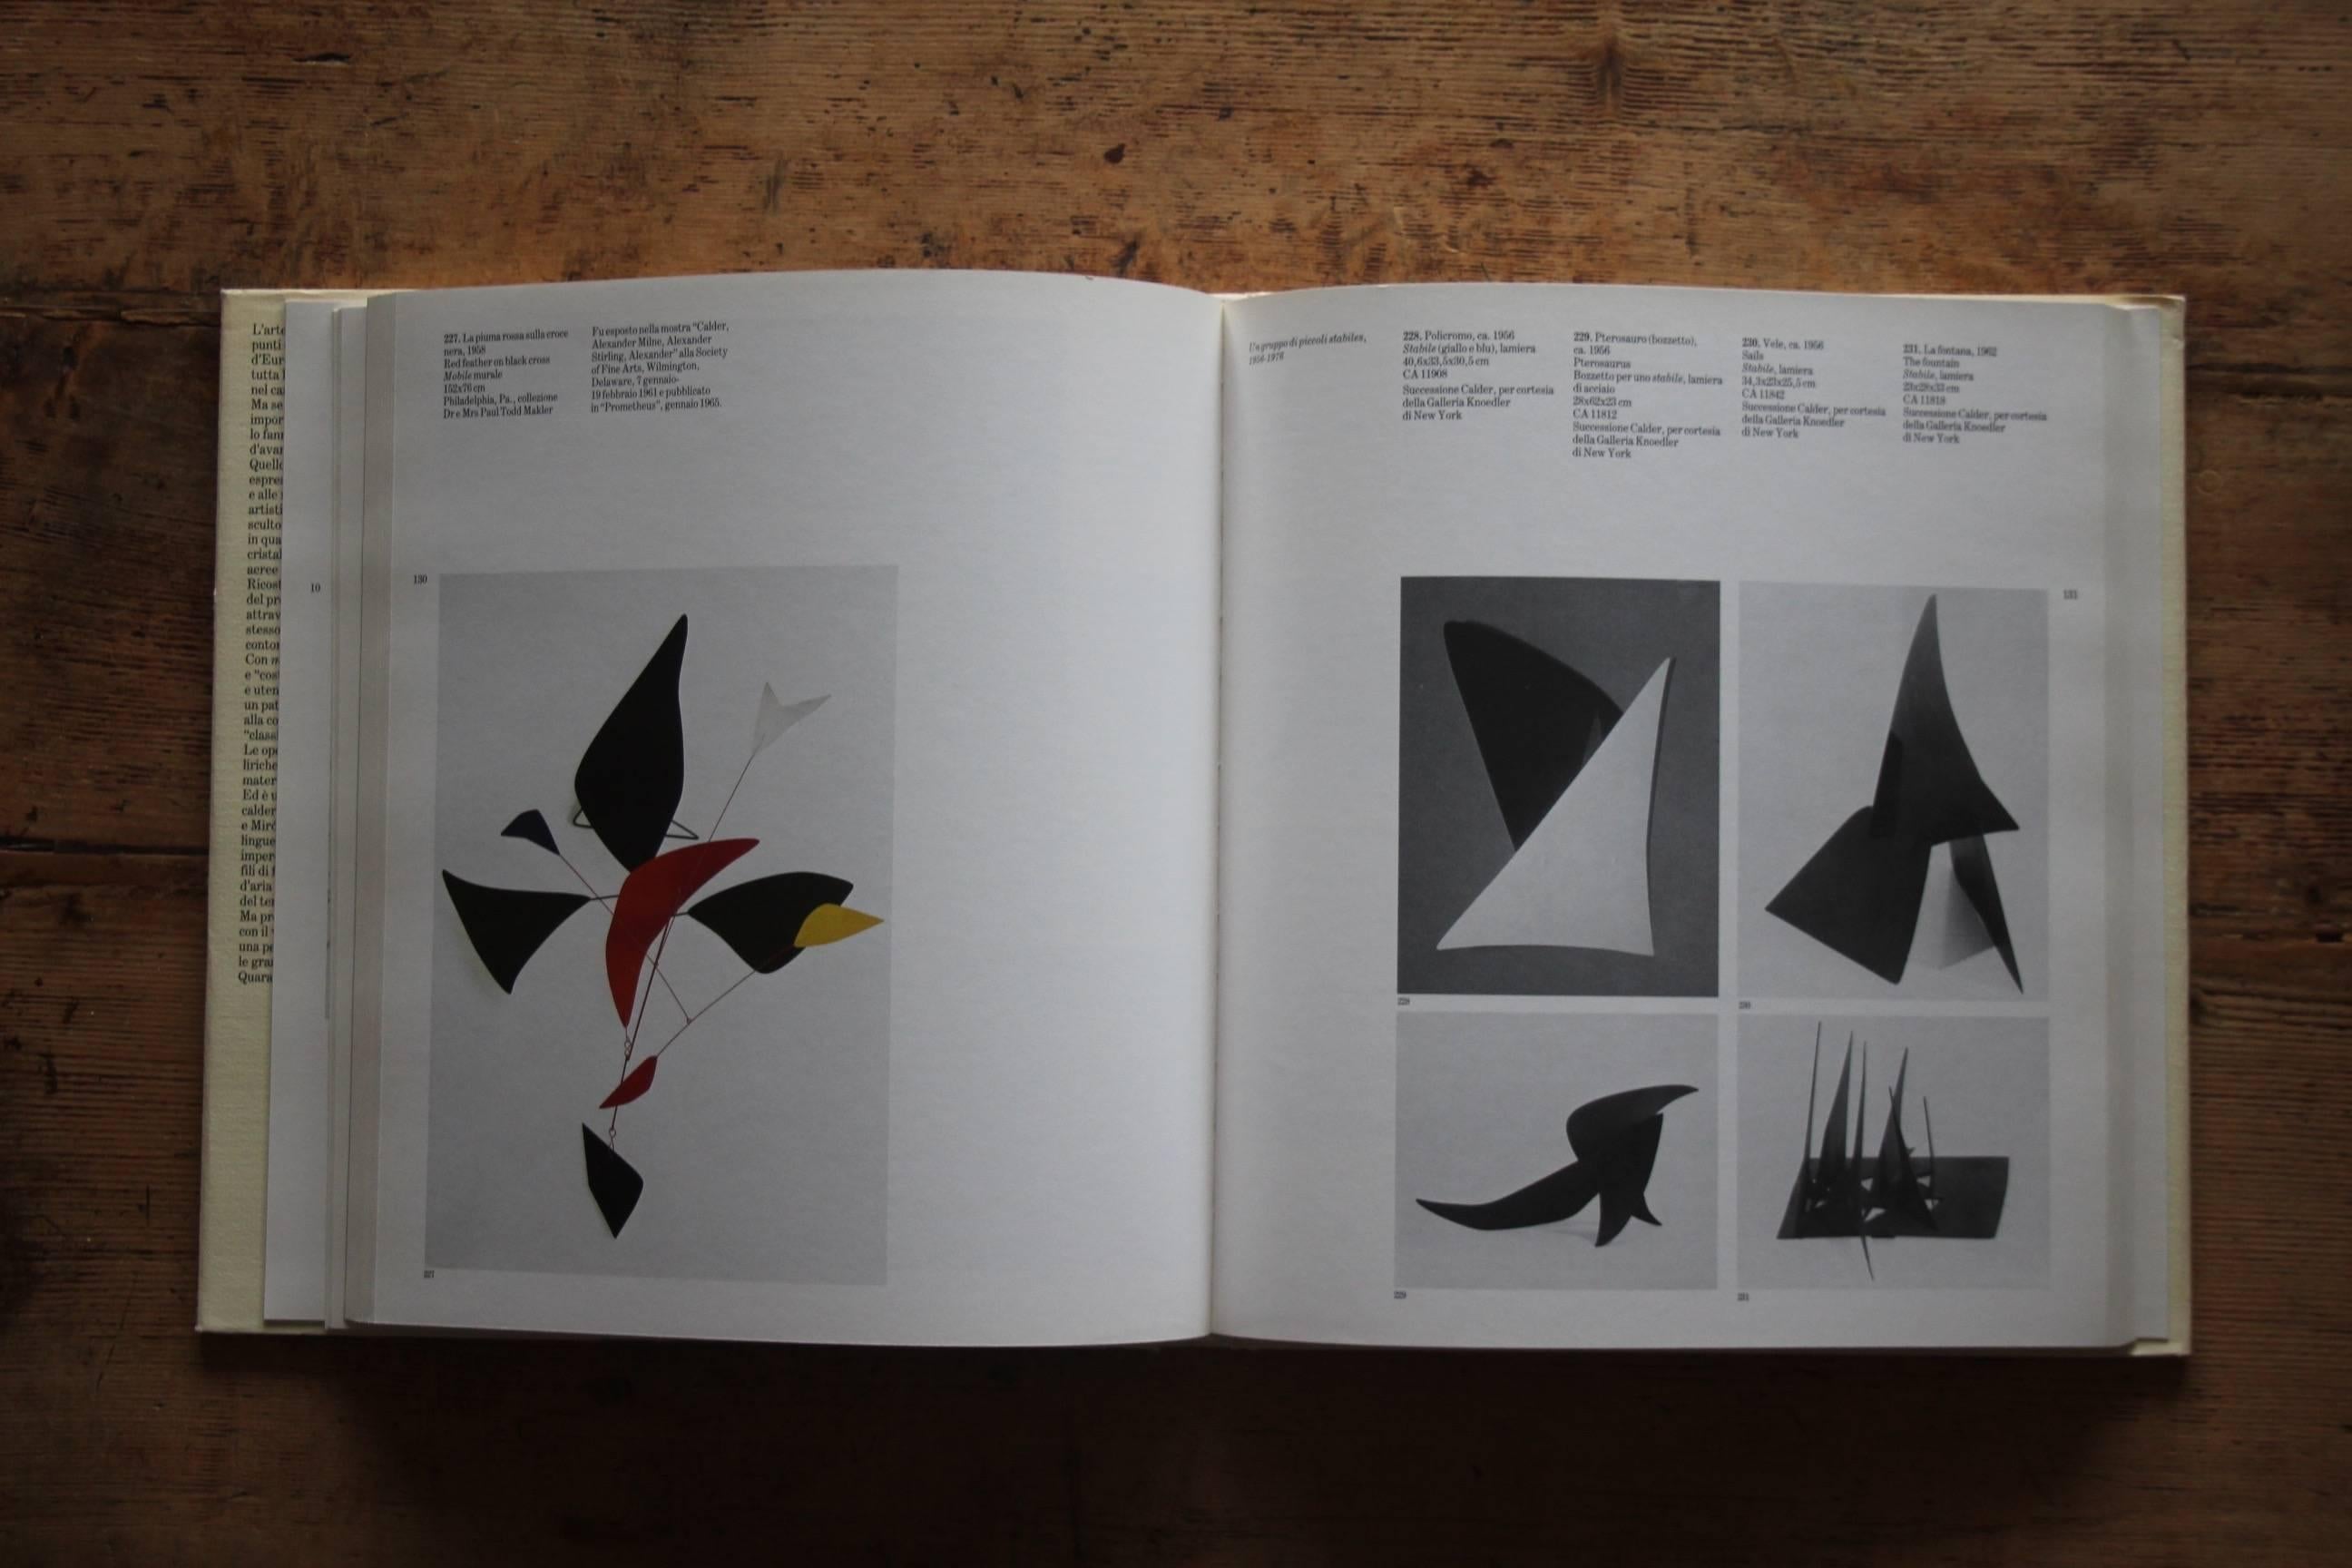 Calder book in Italian by Giovanni Carandente ed electa 250 pages.